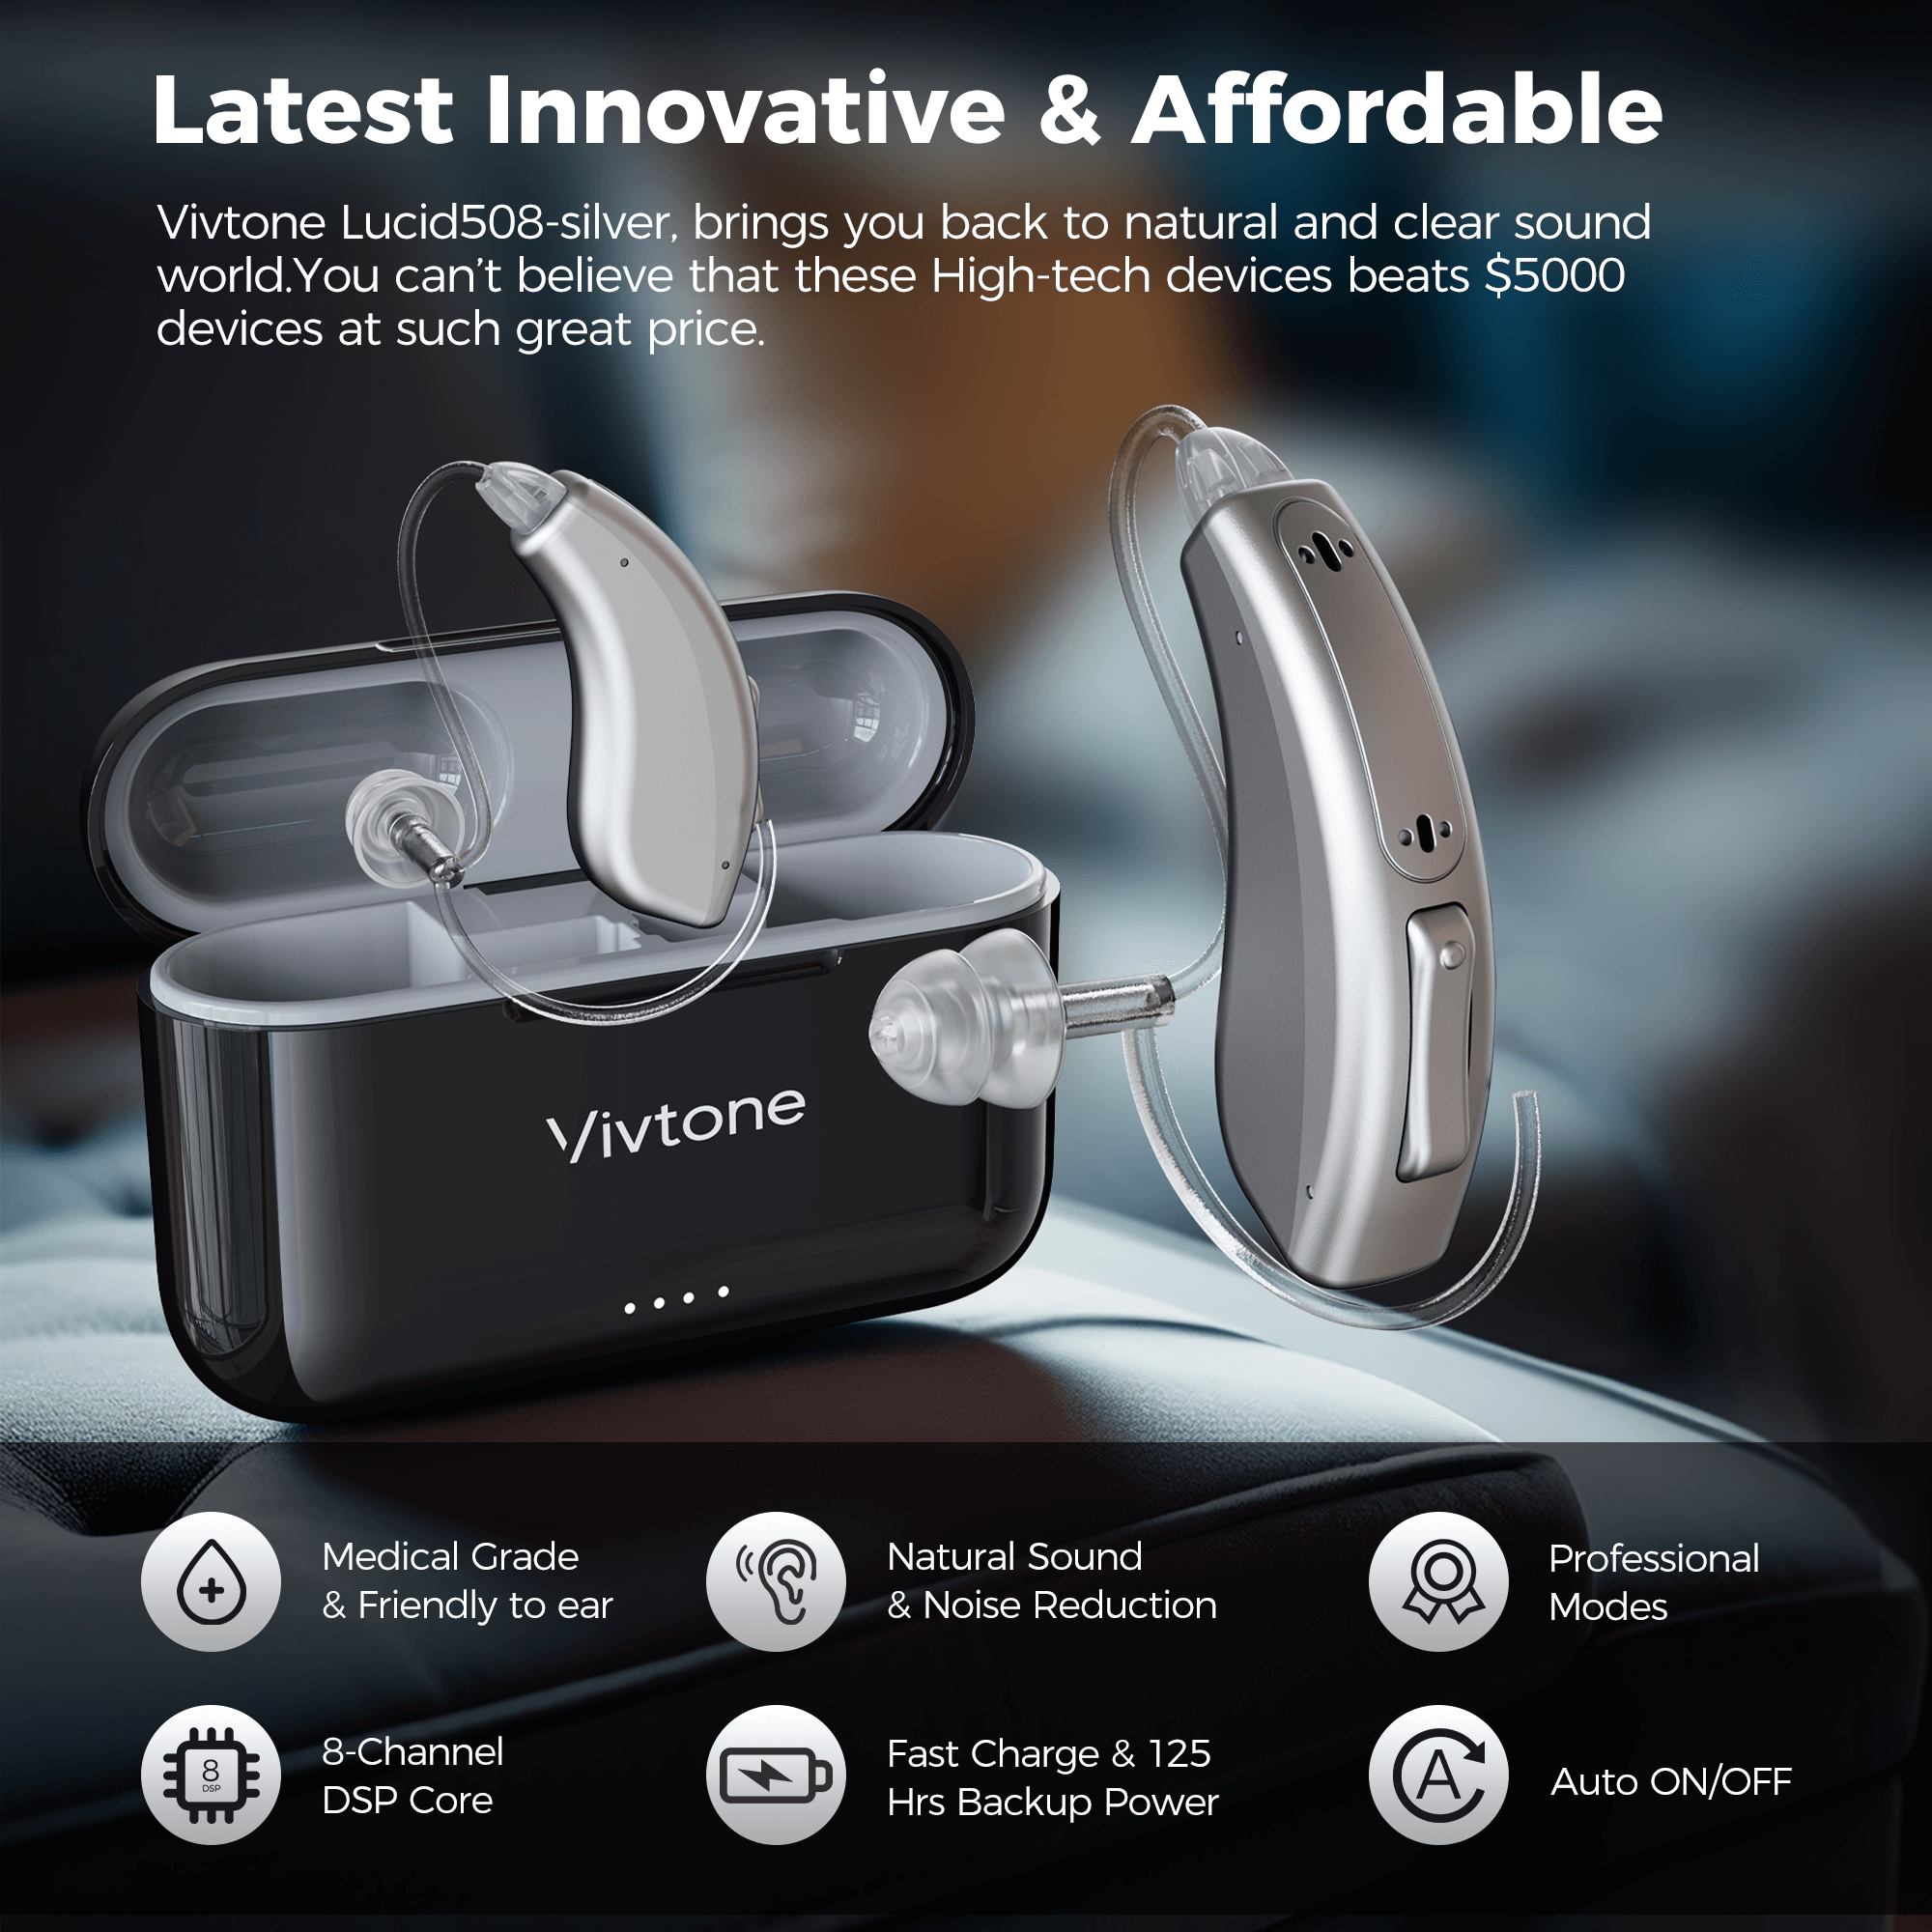 2-vivtone lucid508-silver hearing aids-innovative & affordable